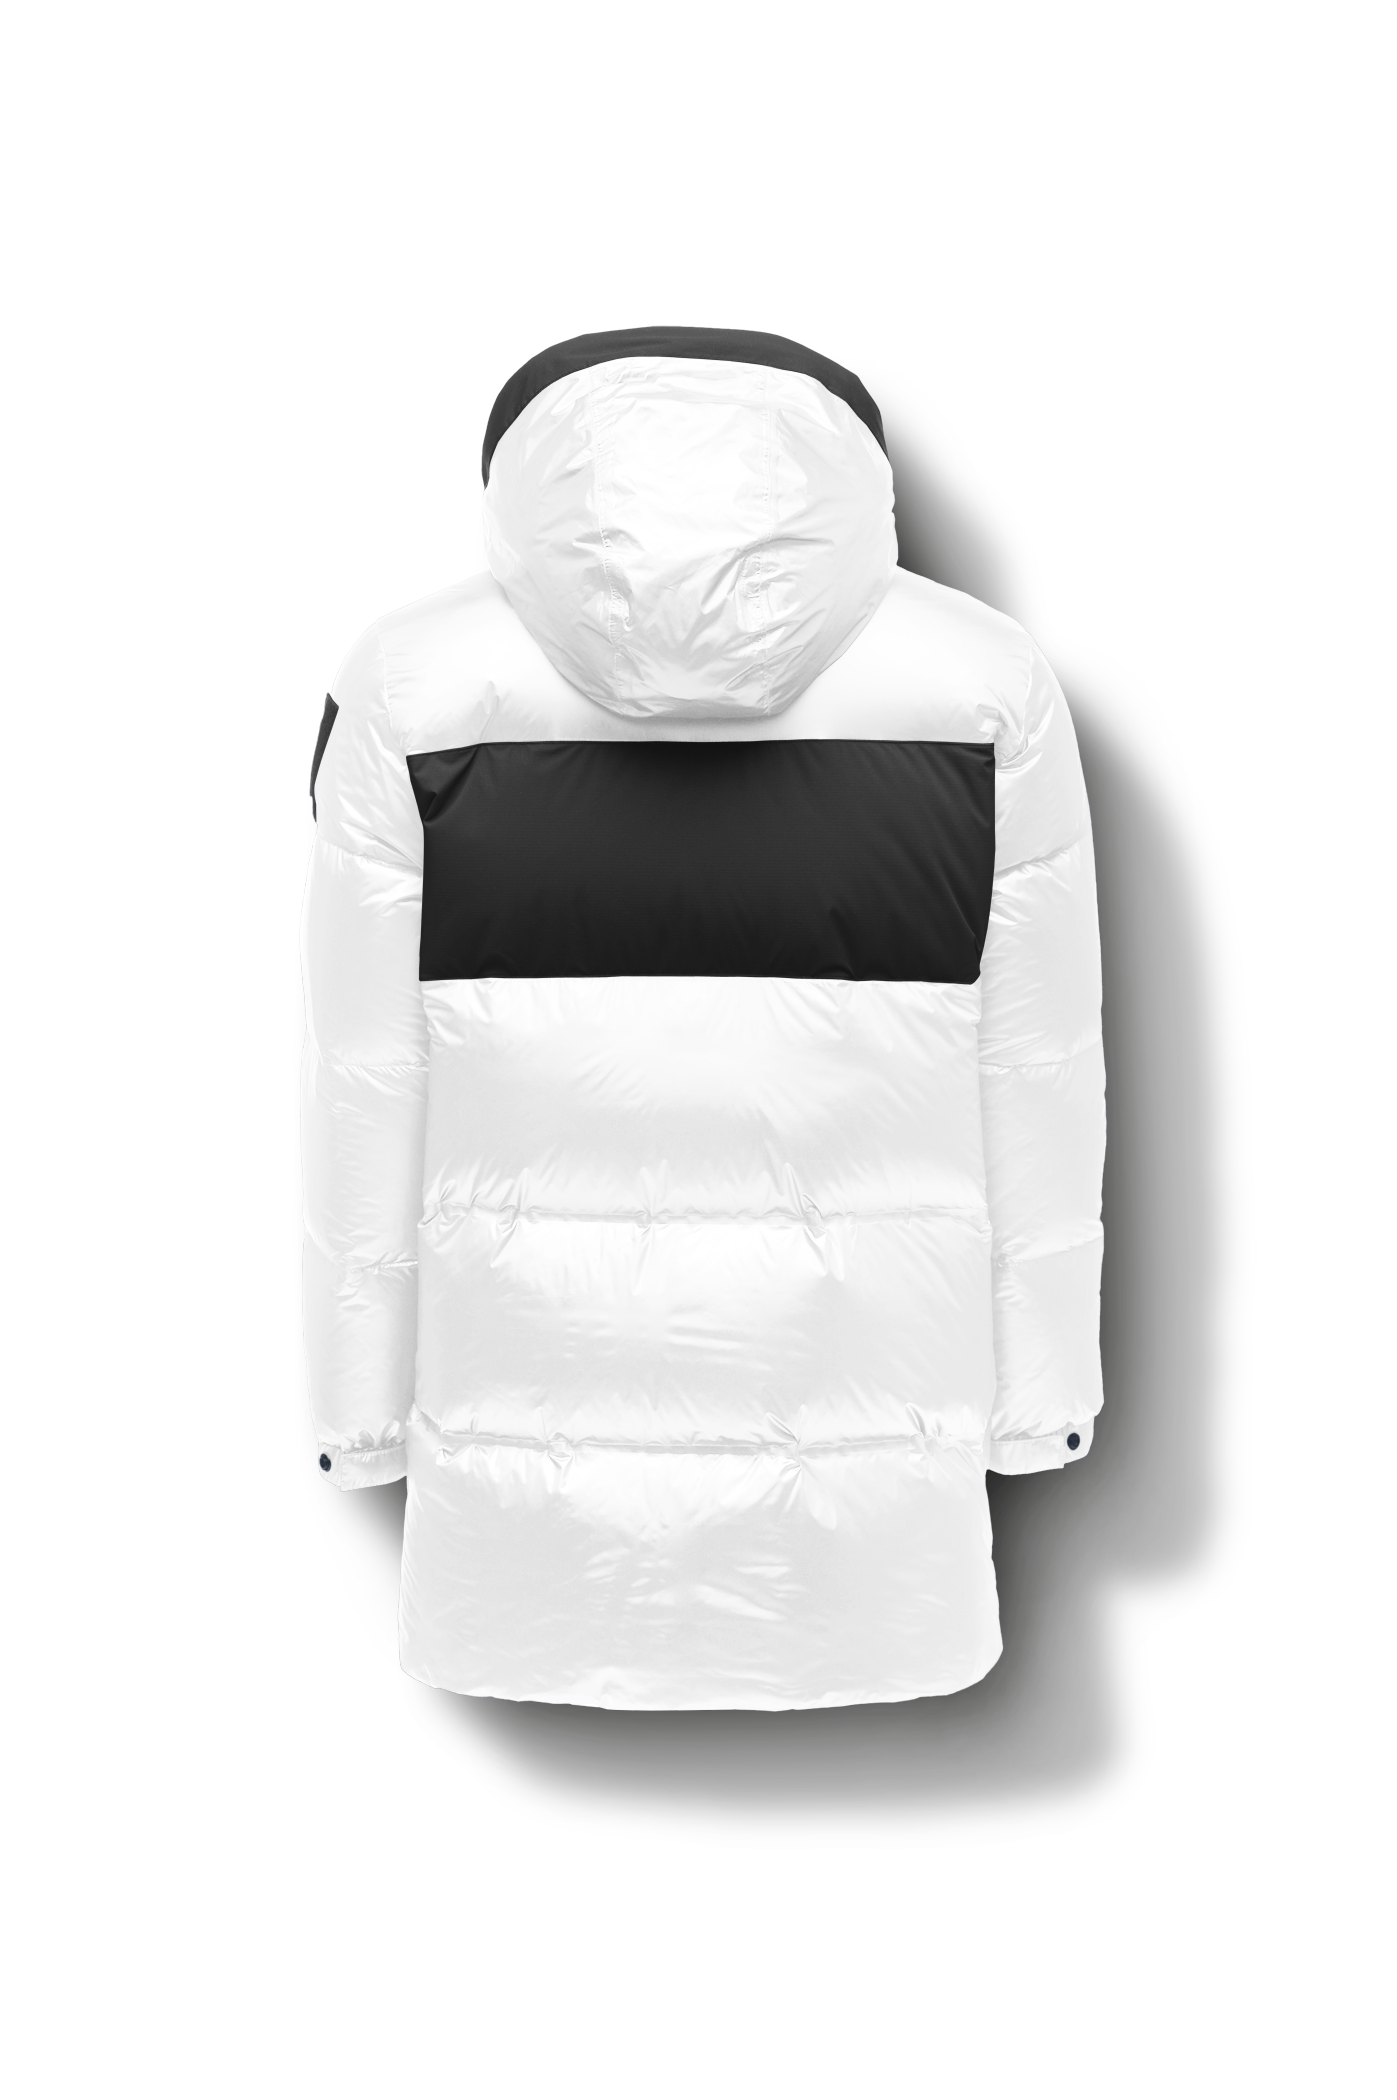 Neelix Men's Long Puffer Jacket in thigh length, premium cire technical nylon taffeta and stretch ripstop fabrication, Premium Canadian origin White Duck Down insulation, non-removable down-filled hood, two-way centre-front zipper, pit zipper vents, hidden chest zipper pockets, fleece-lined magnetic closure waist pockets, in Chalk